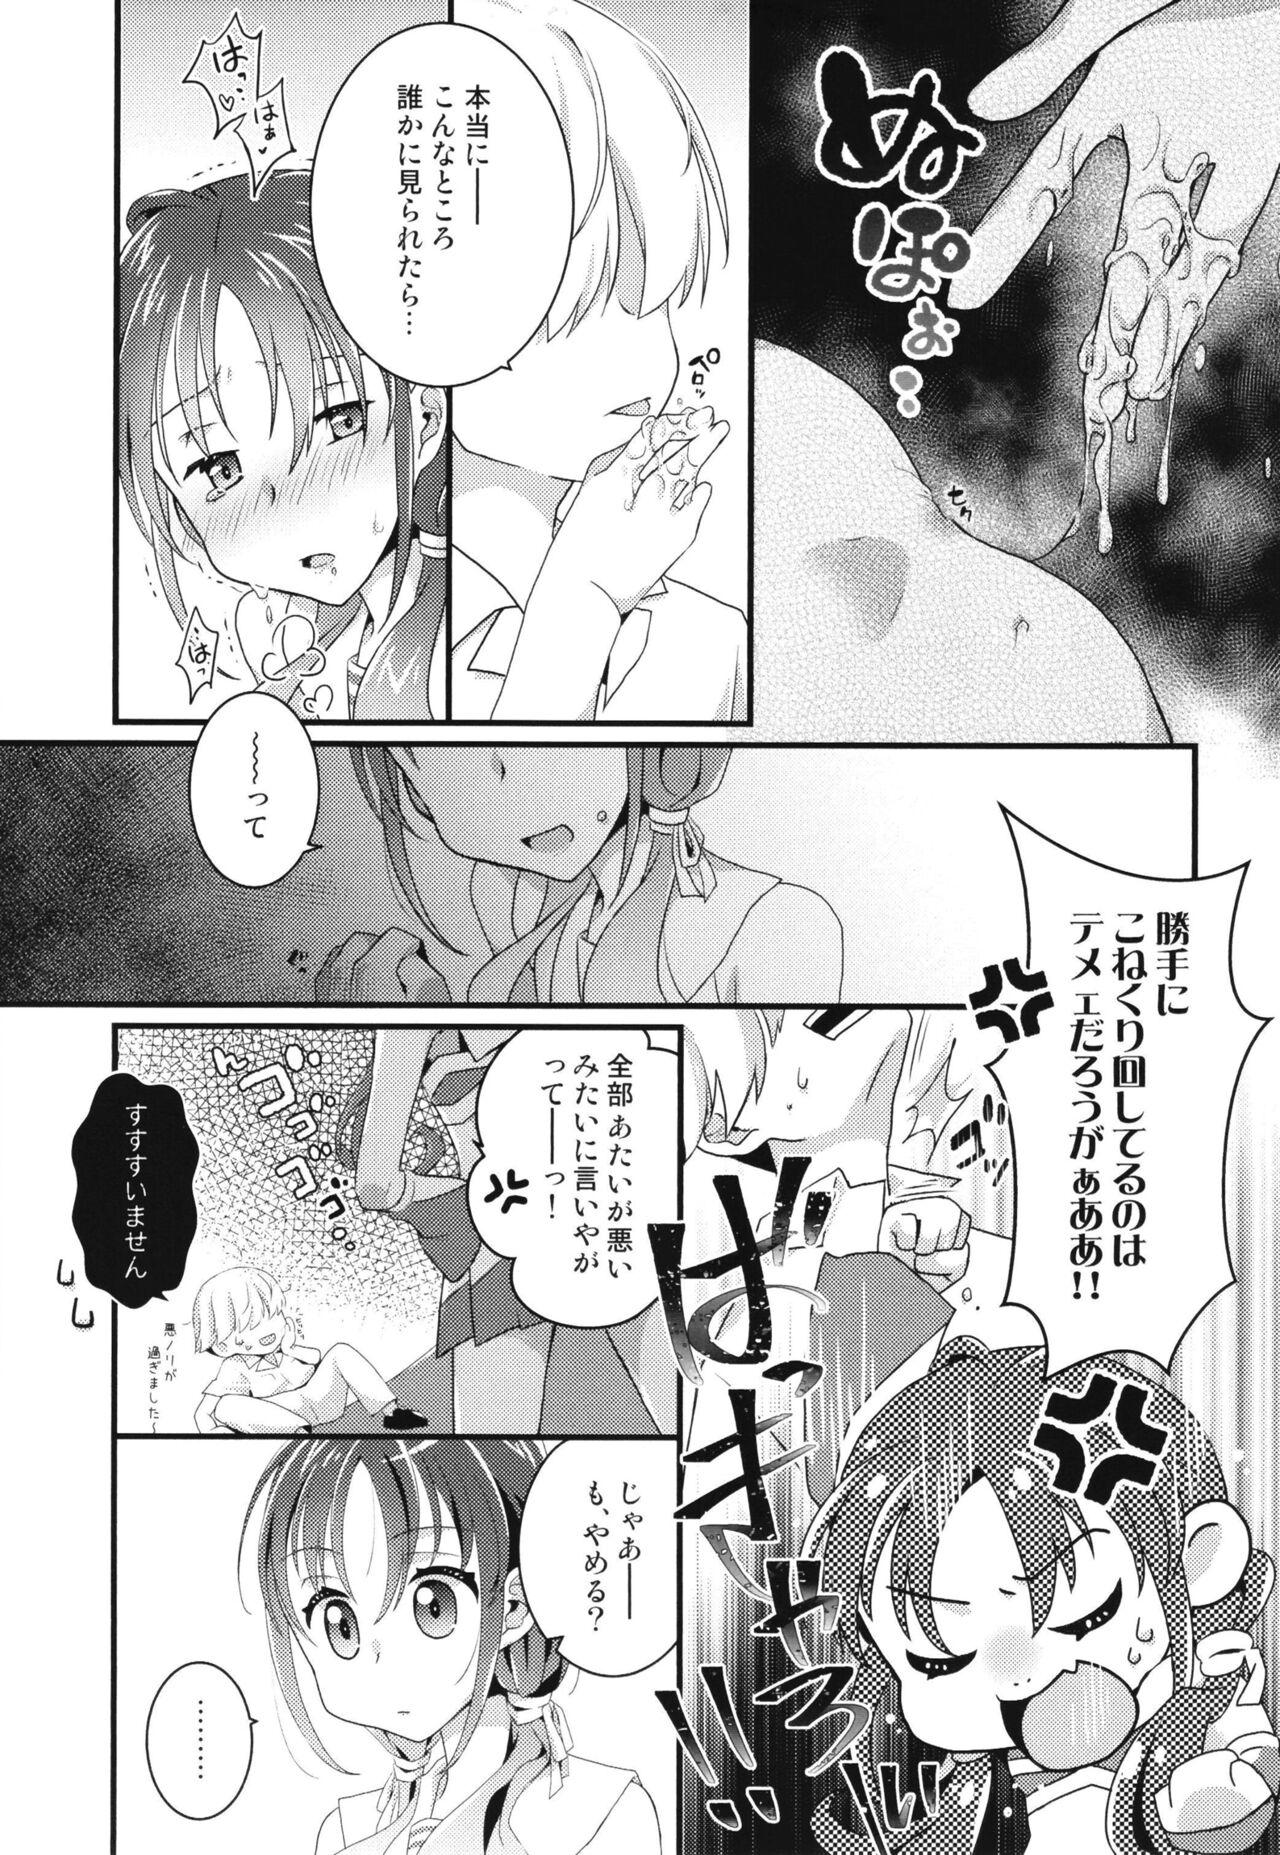 Action Yah! Cheer! yeah! - Kantai collection Amateurs Gone Wild - Page 7